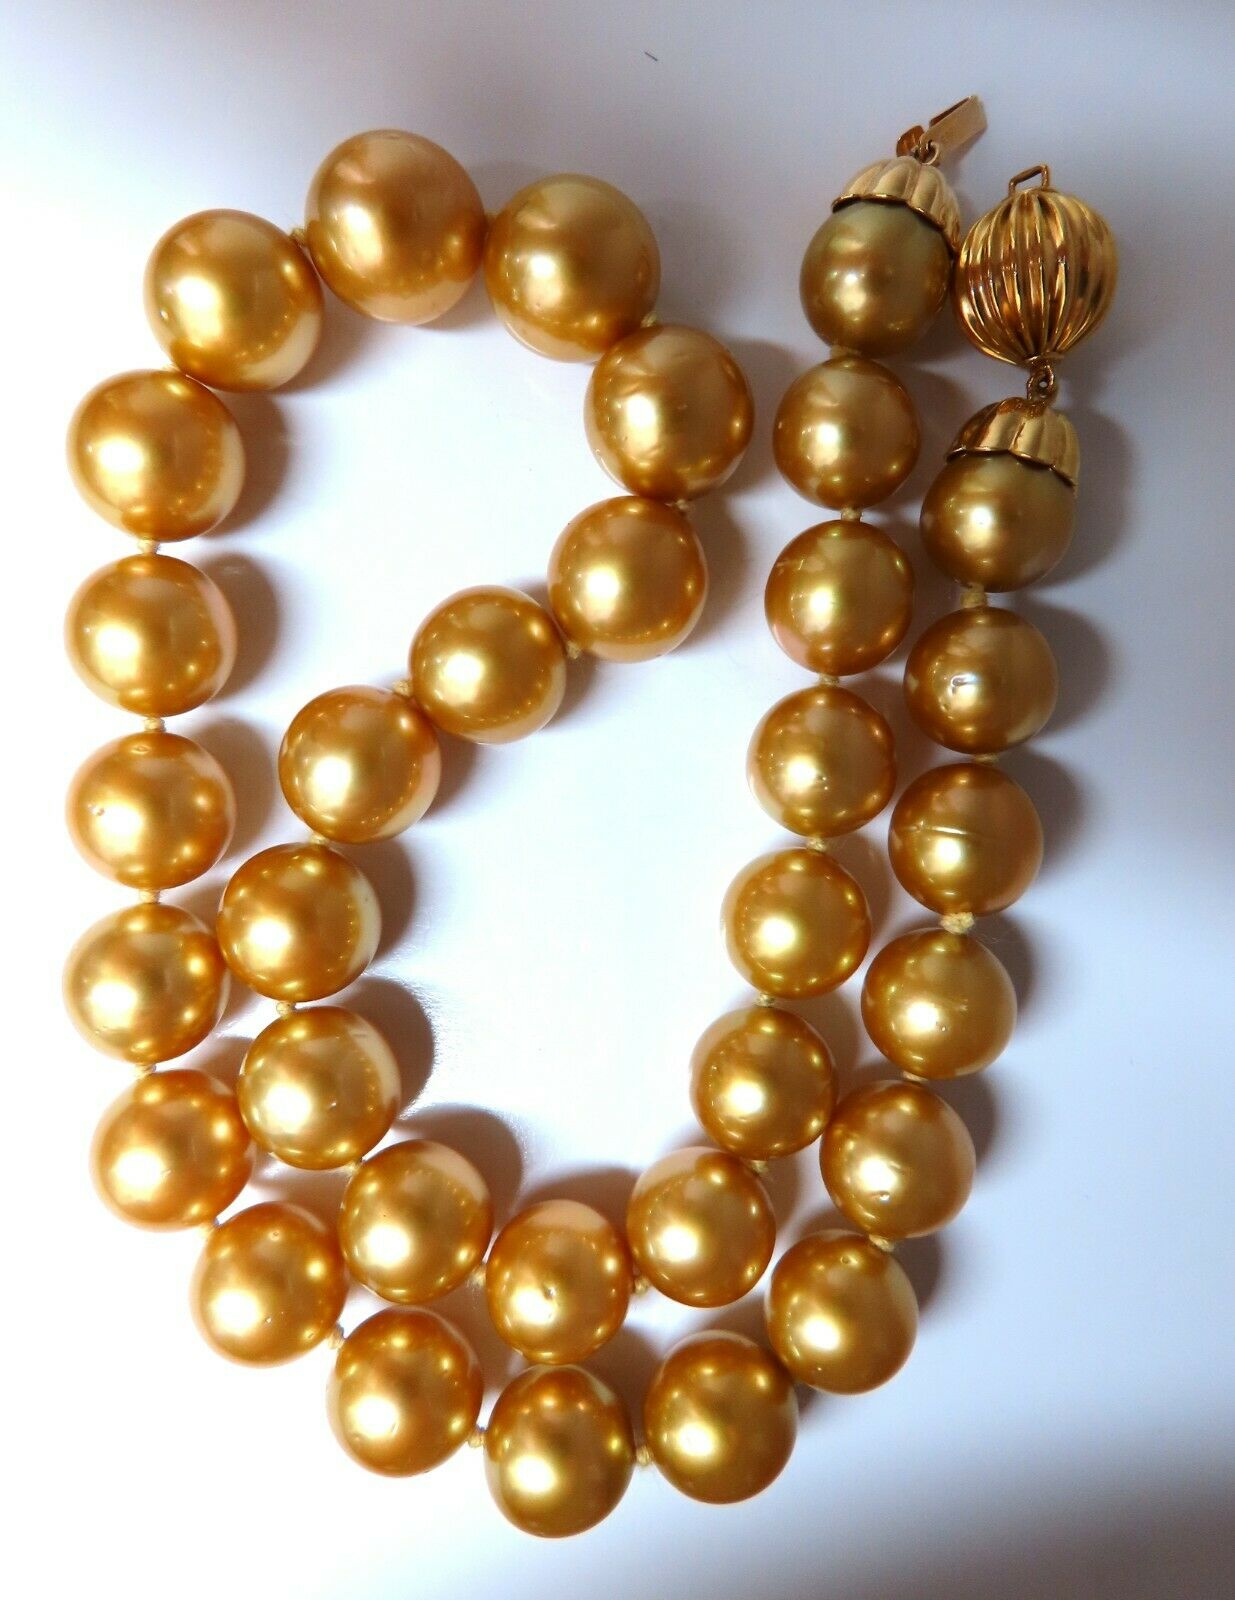 GIA certified Natural South Sea Golden Pearls Necklace 14mm